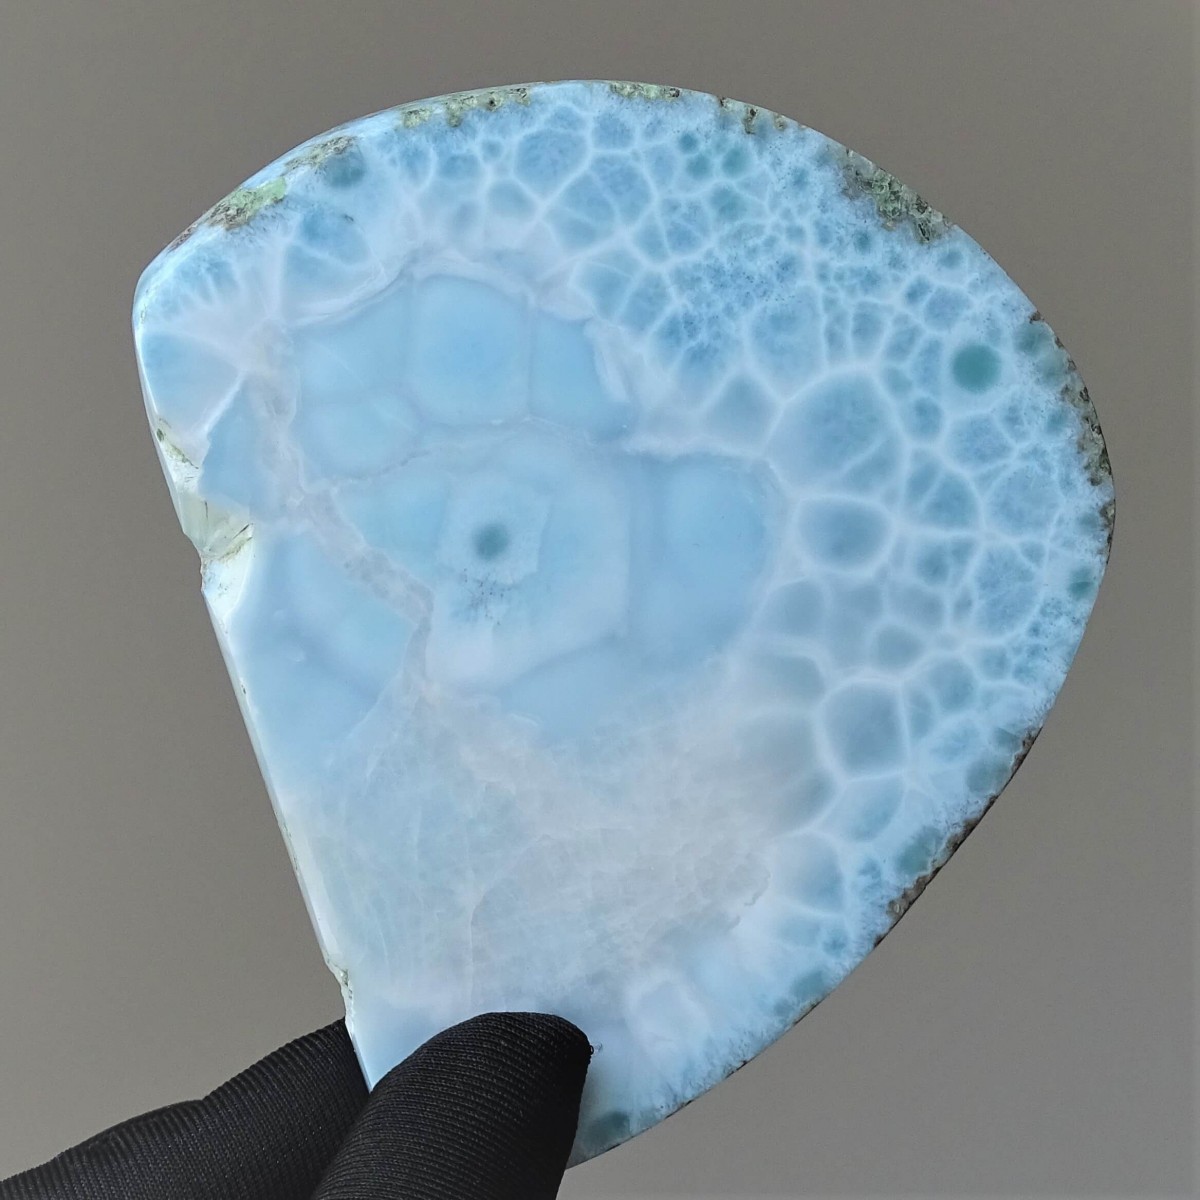 Larimar plate polished 160g - TOP QUALITY Dominican republic